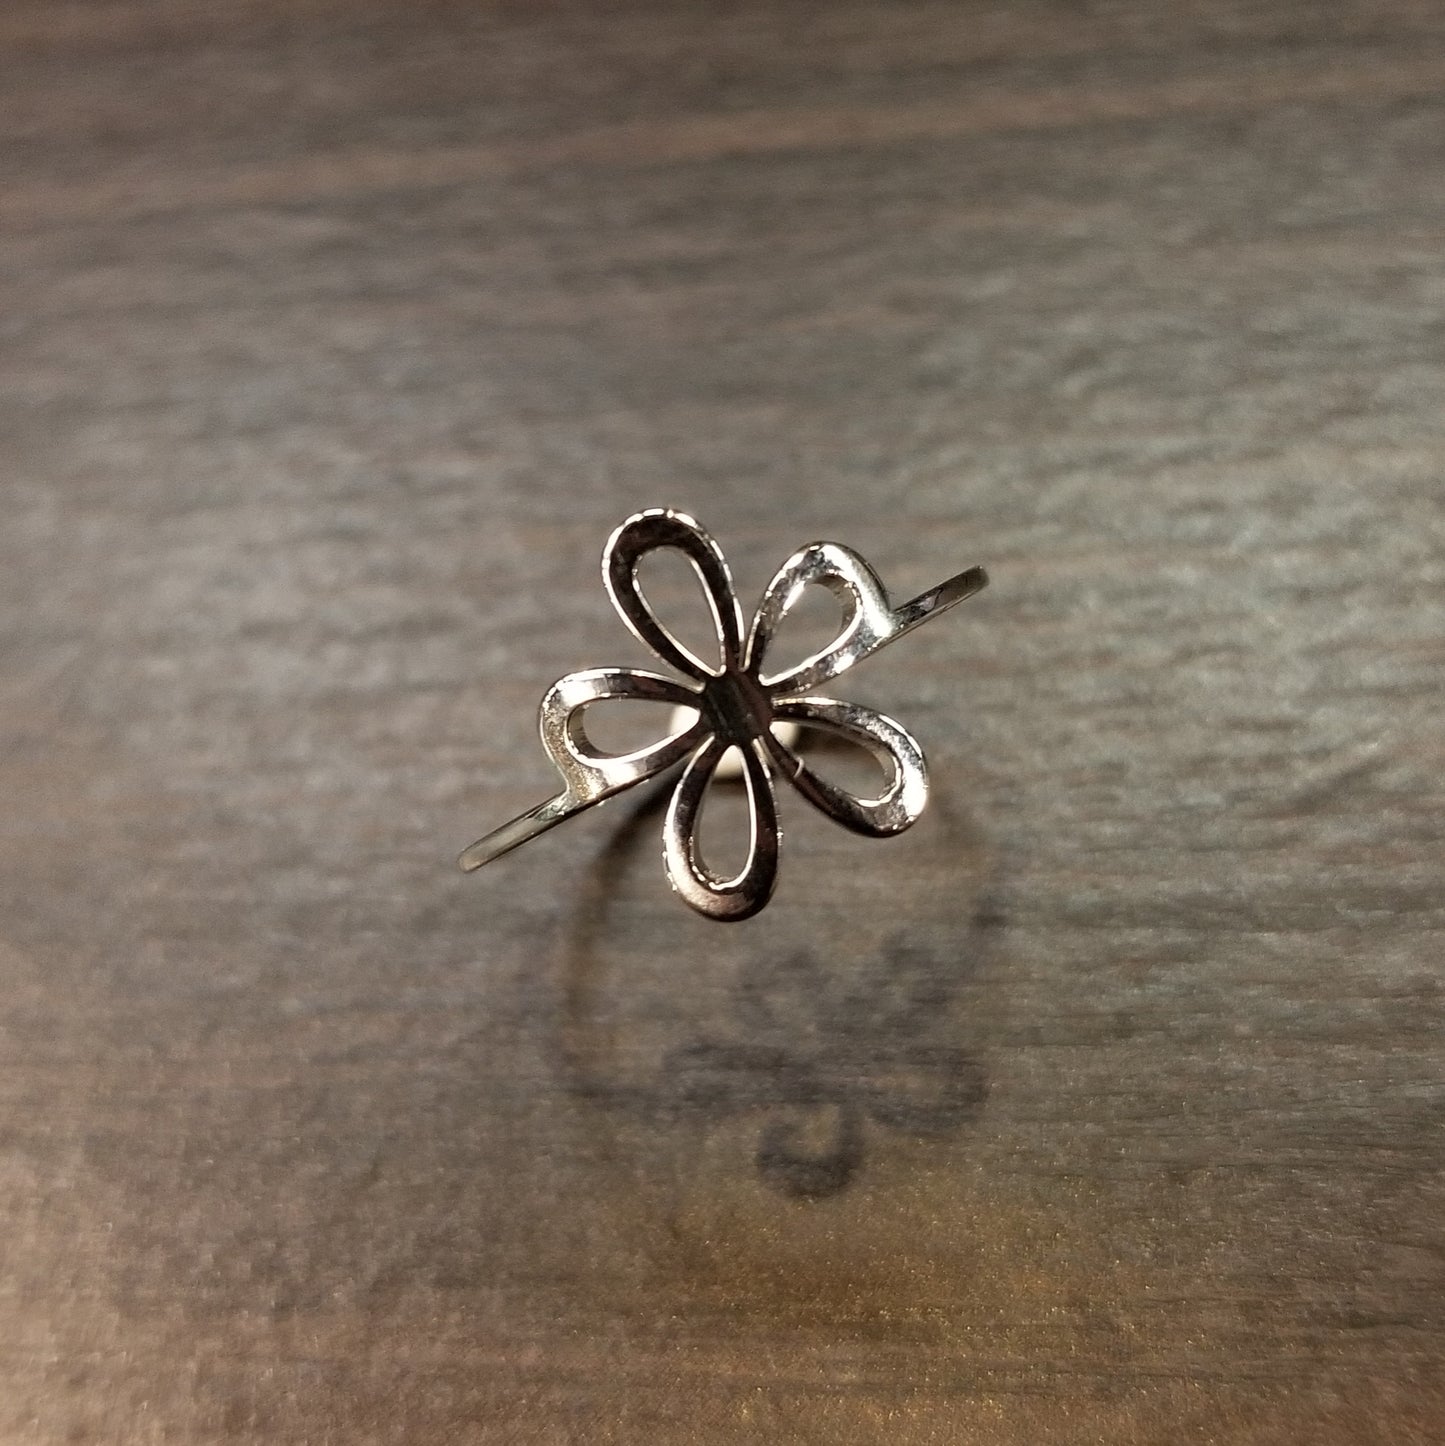 Stainless Steel Daisy Ring